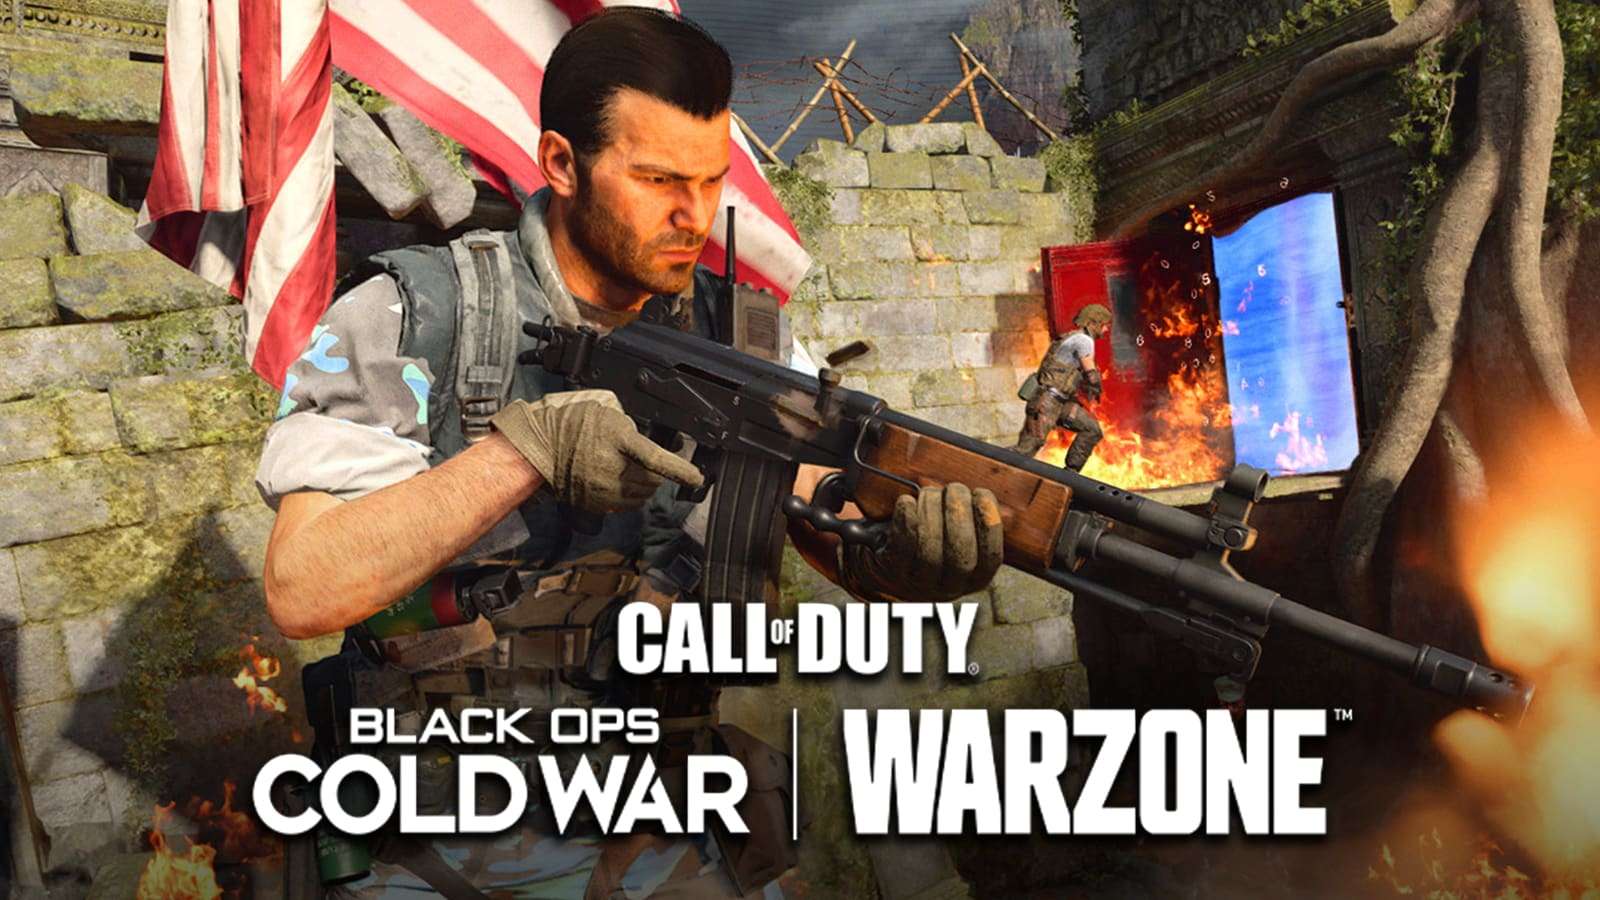 Warzone operator shooting new Grav assault rifle in Black Ops Cold War.